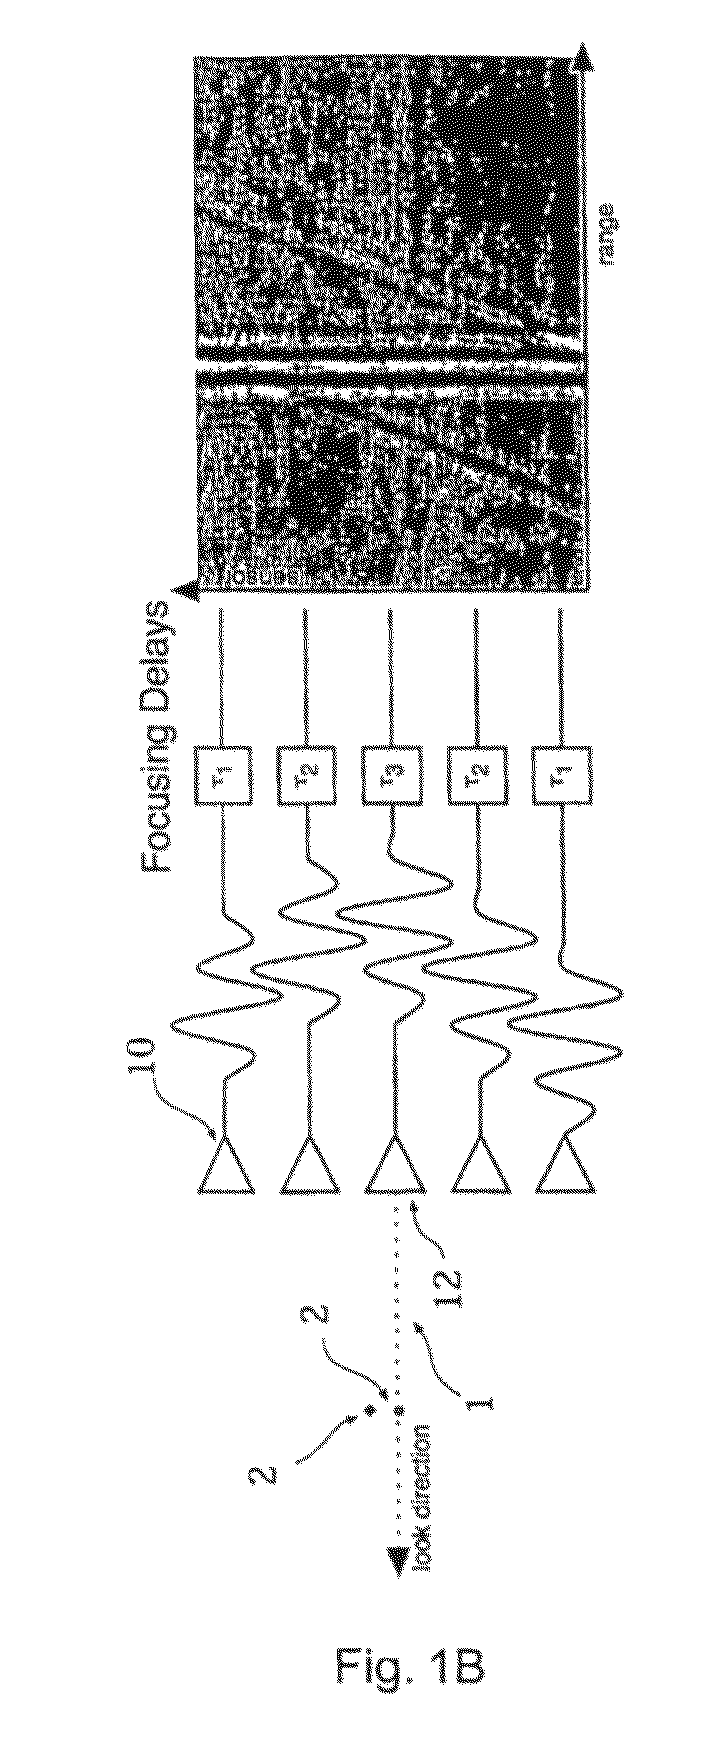 Systems and method for adaptive beamforming for image reconstruction and/or target/source localization